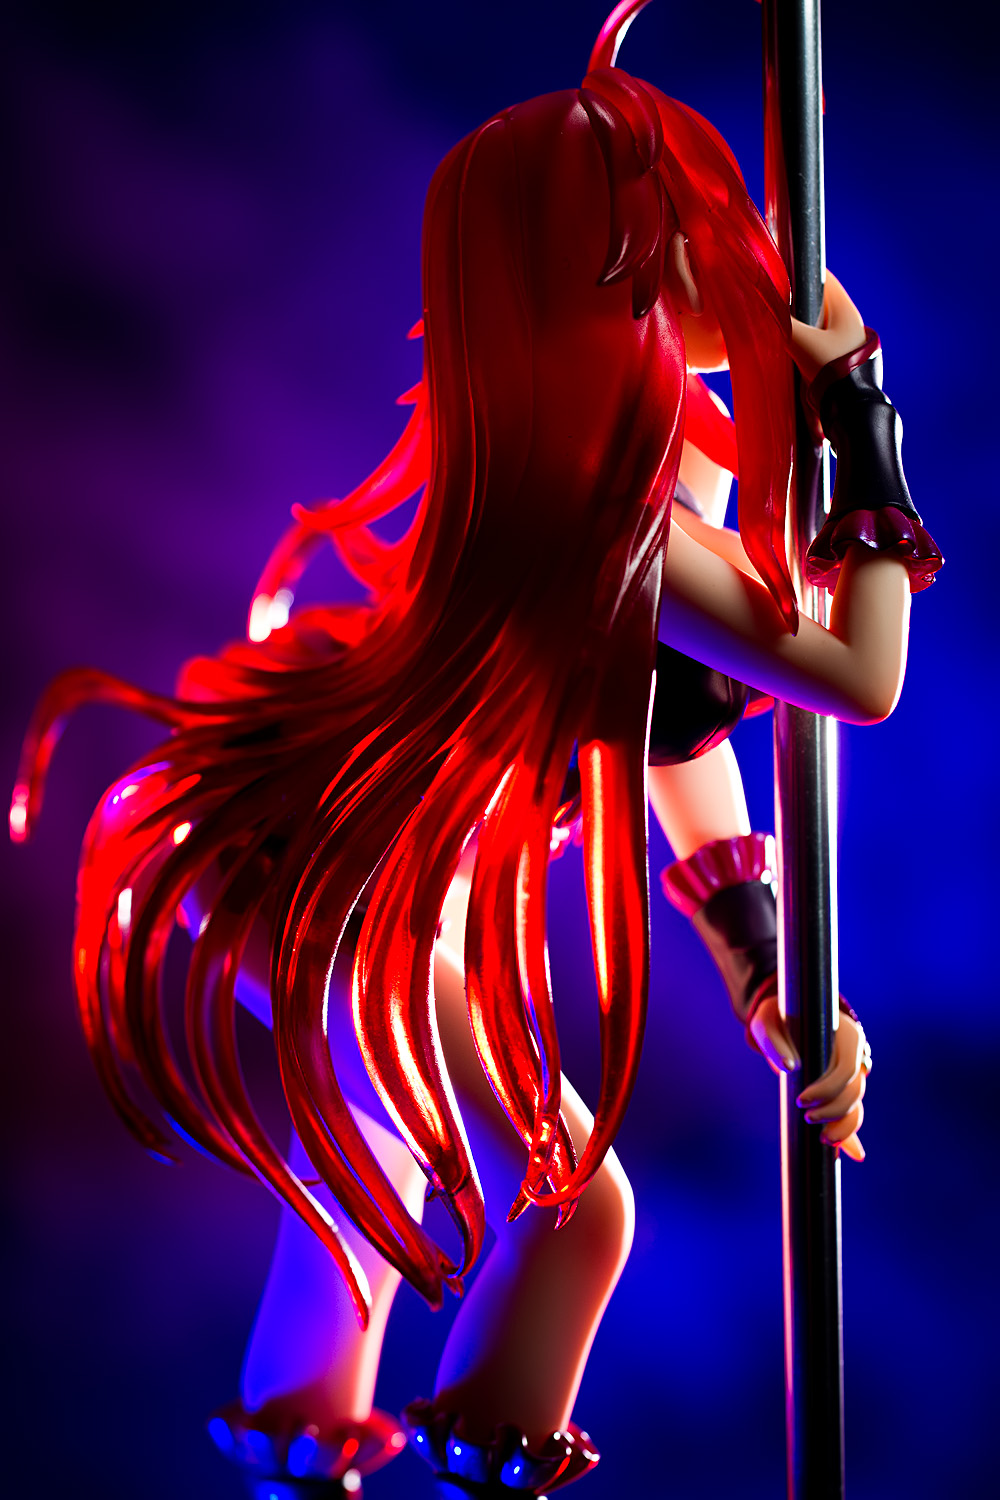 Rias Gremory from High School DxD (Pole Dance Version) (NSFW) .